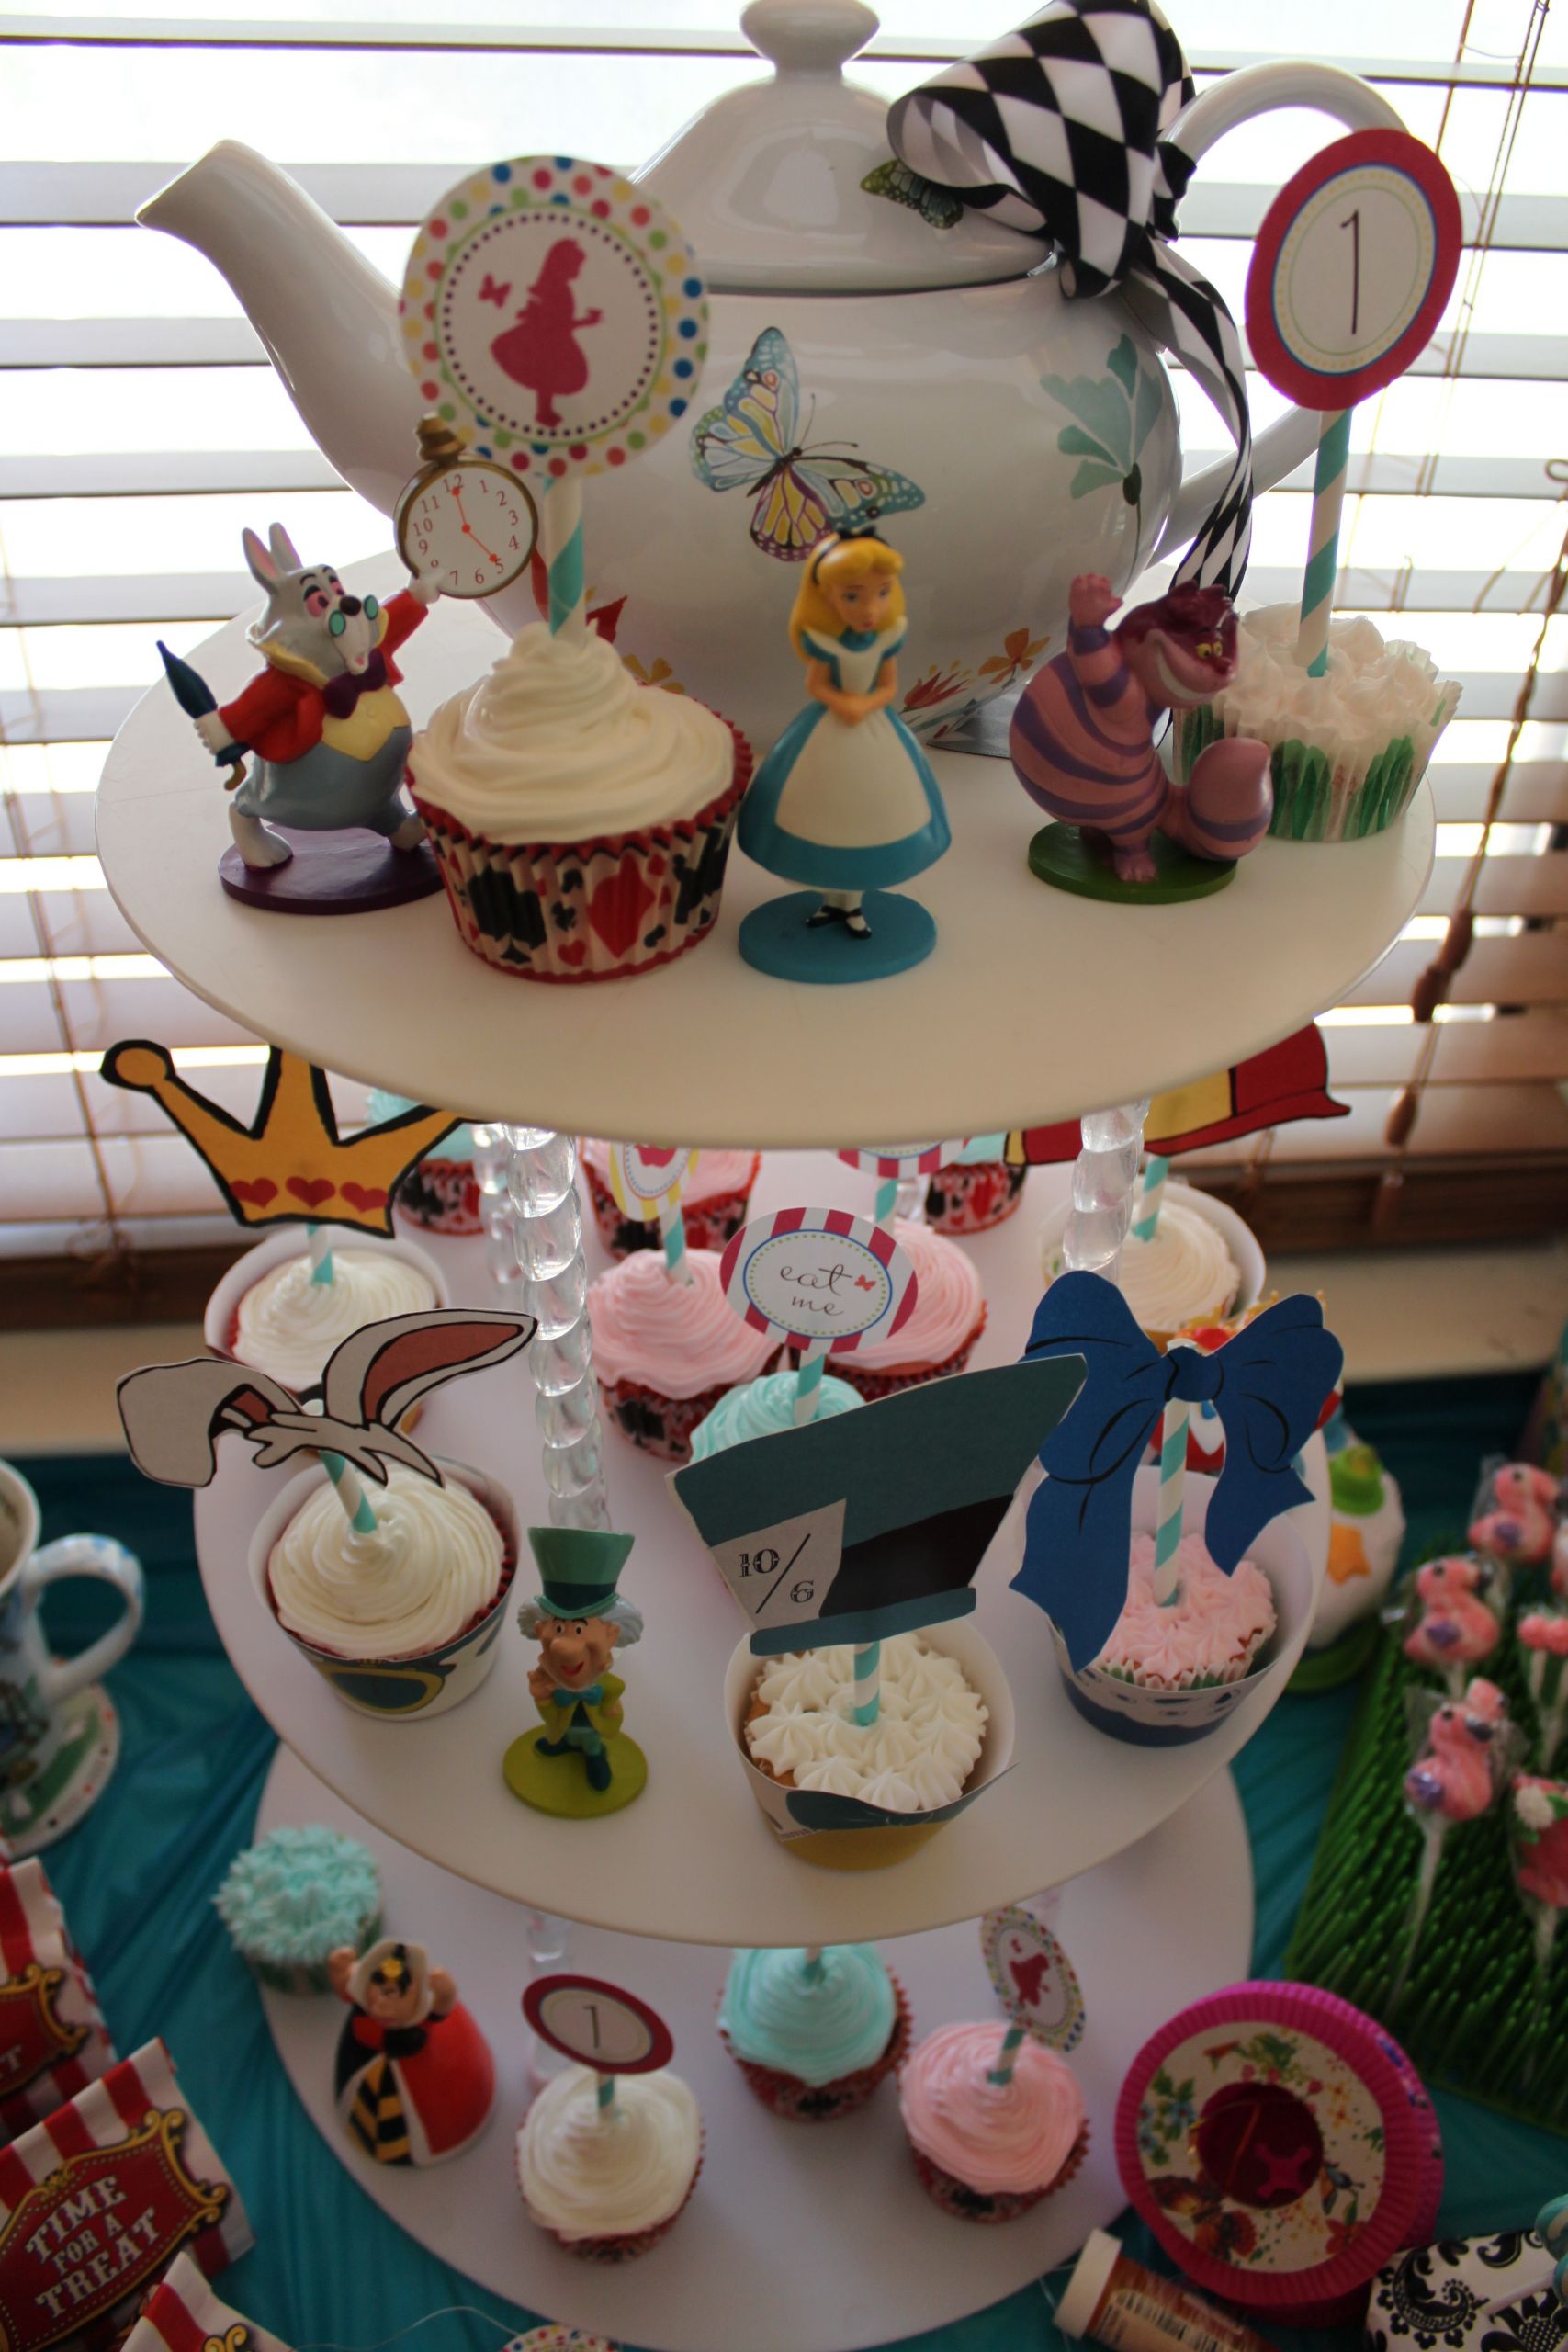 One Year Old Birthday Party Ideas
 e Year Old Birthday Party Alice in “ e”derland Theme